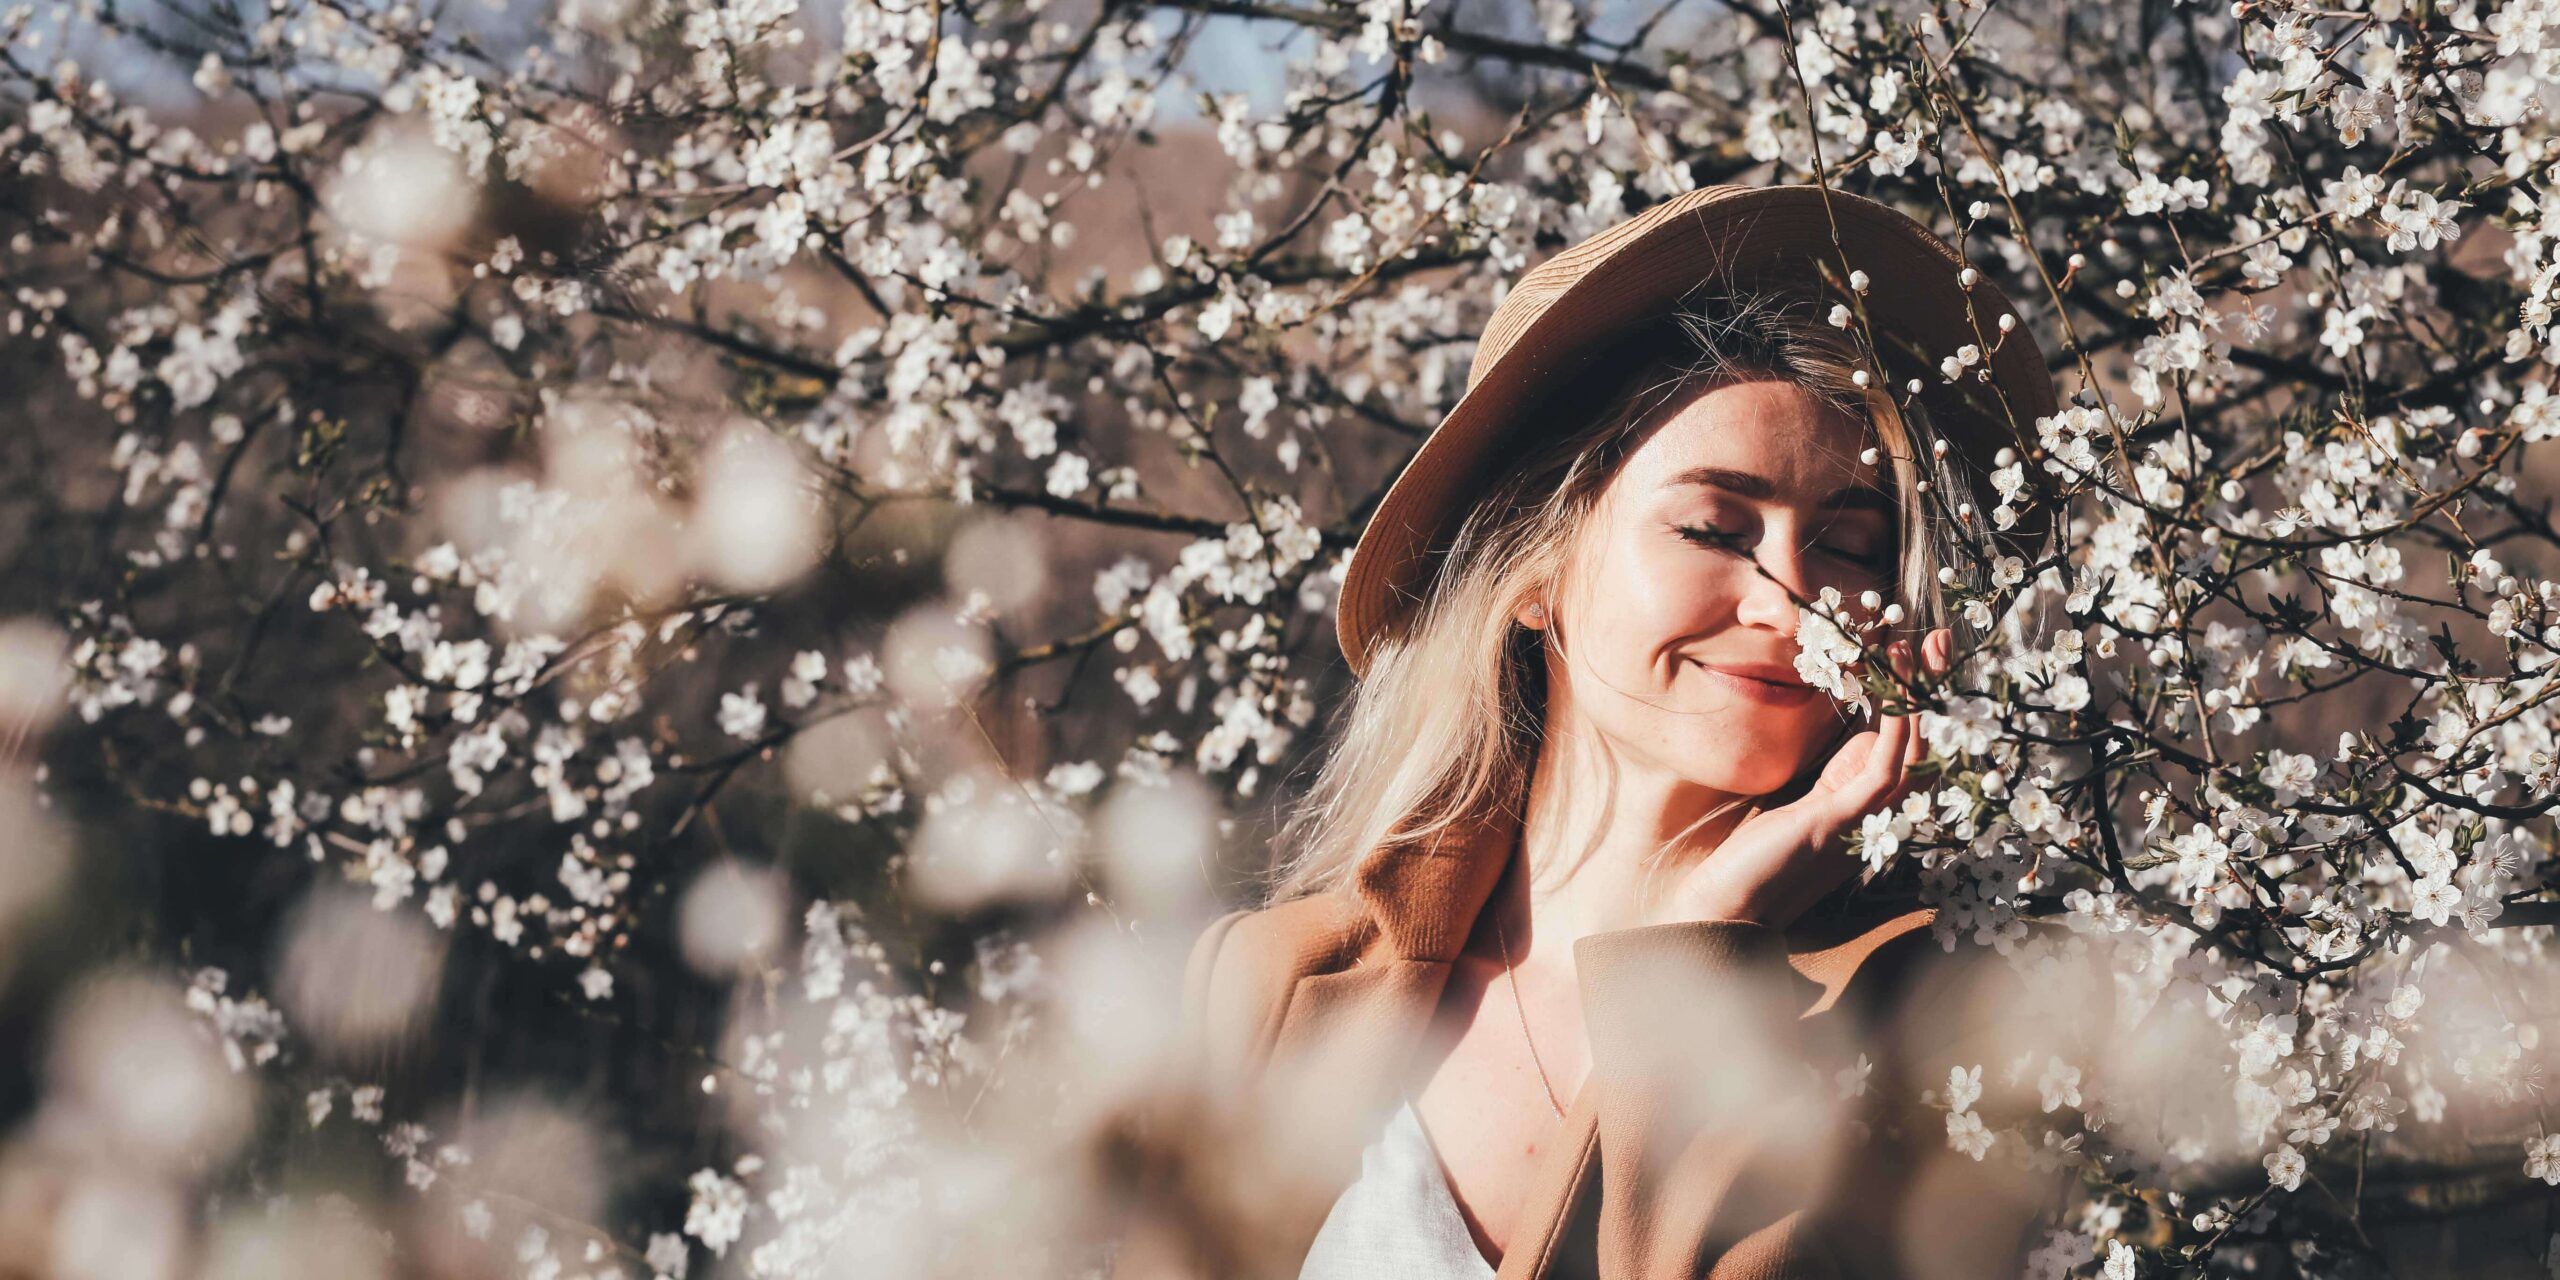 The image shows a young woman with blond, long hair and wearing a hat. She sniffs on the blossoms of a tree.